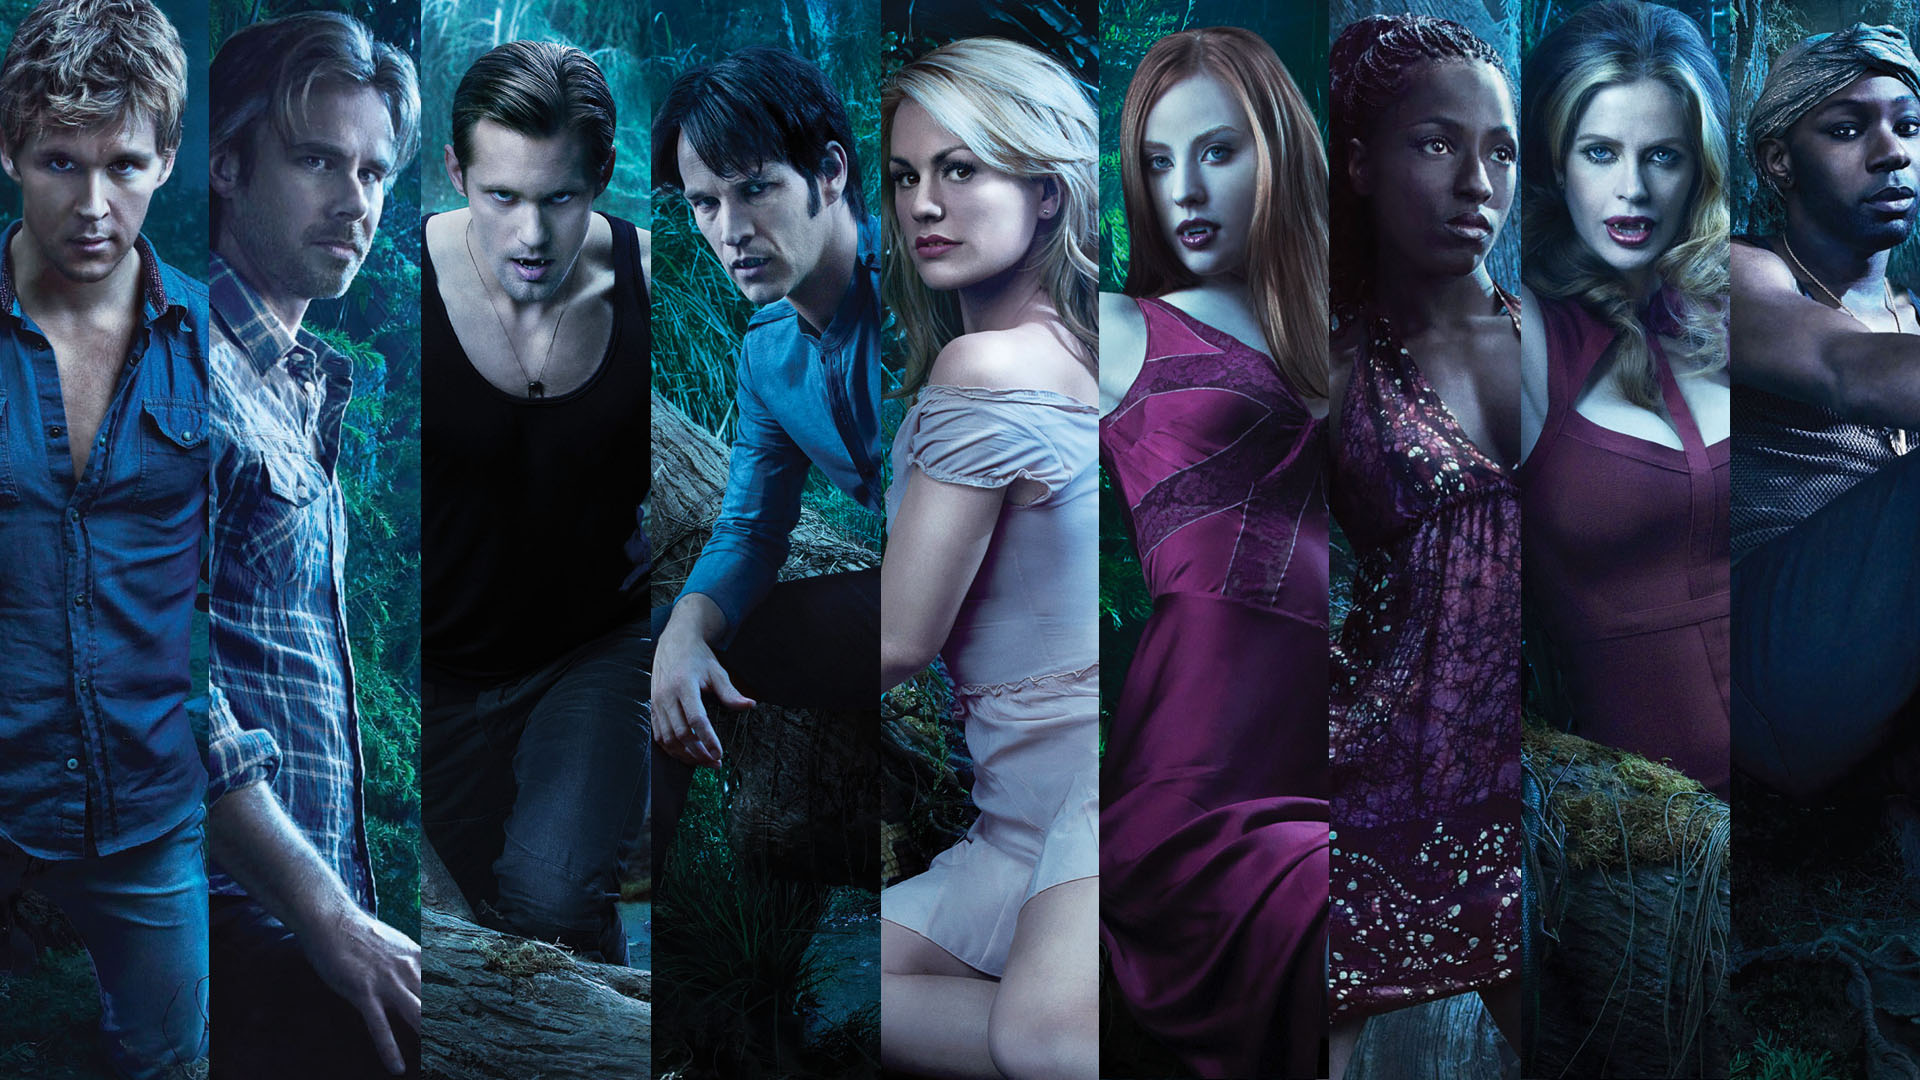 “death is not the end” and true blood’s final season (so far)